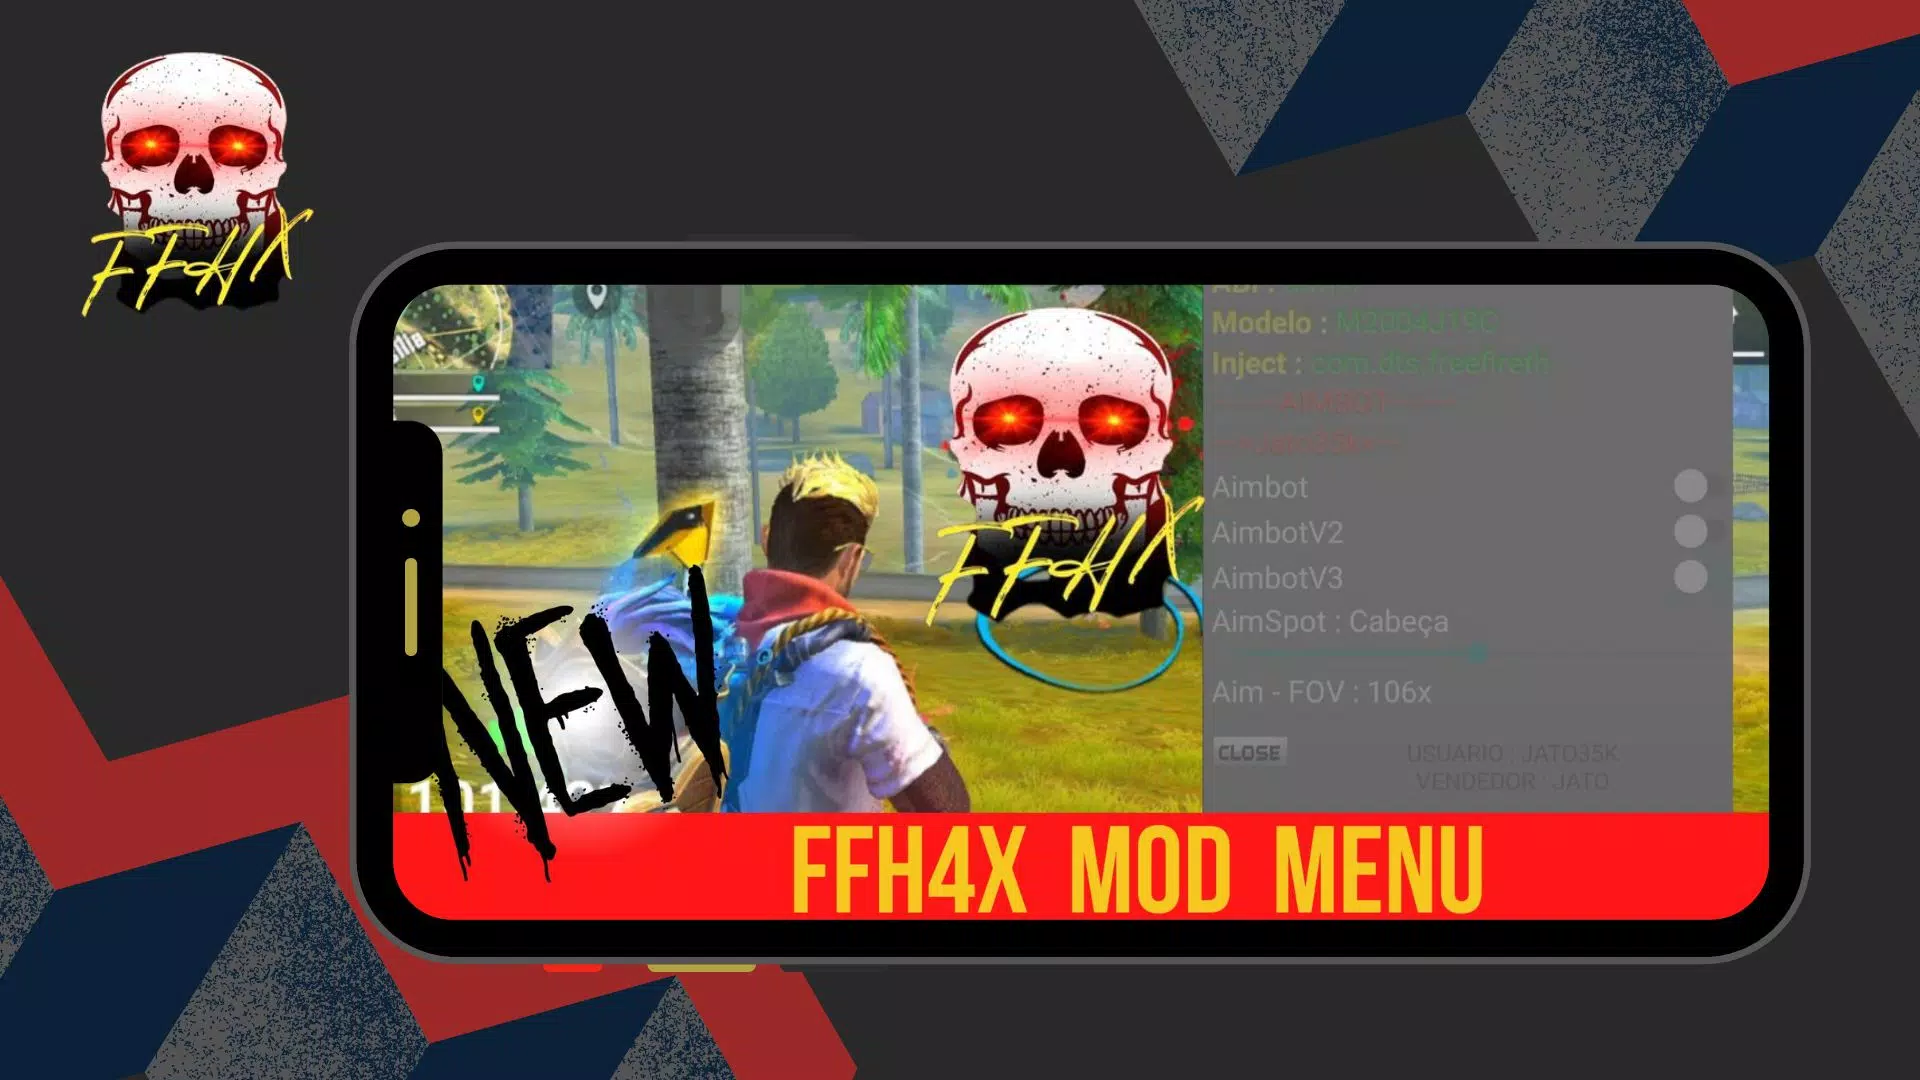 Elite Mod Menu Free Fire APK Download Latest for Android